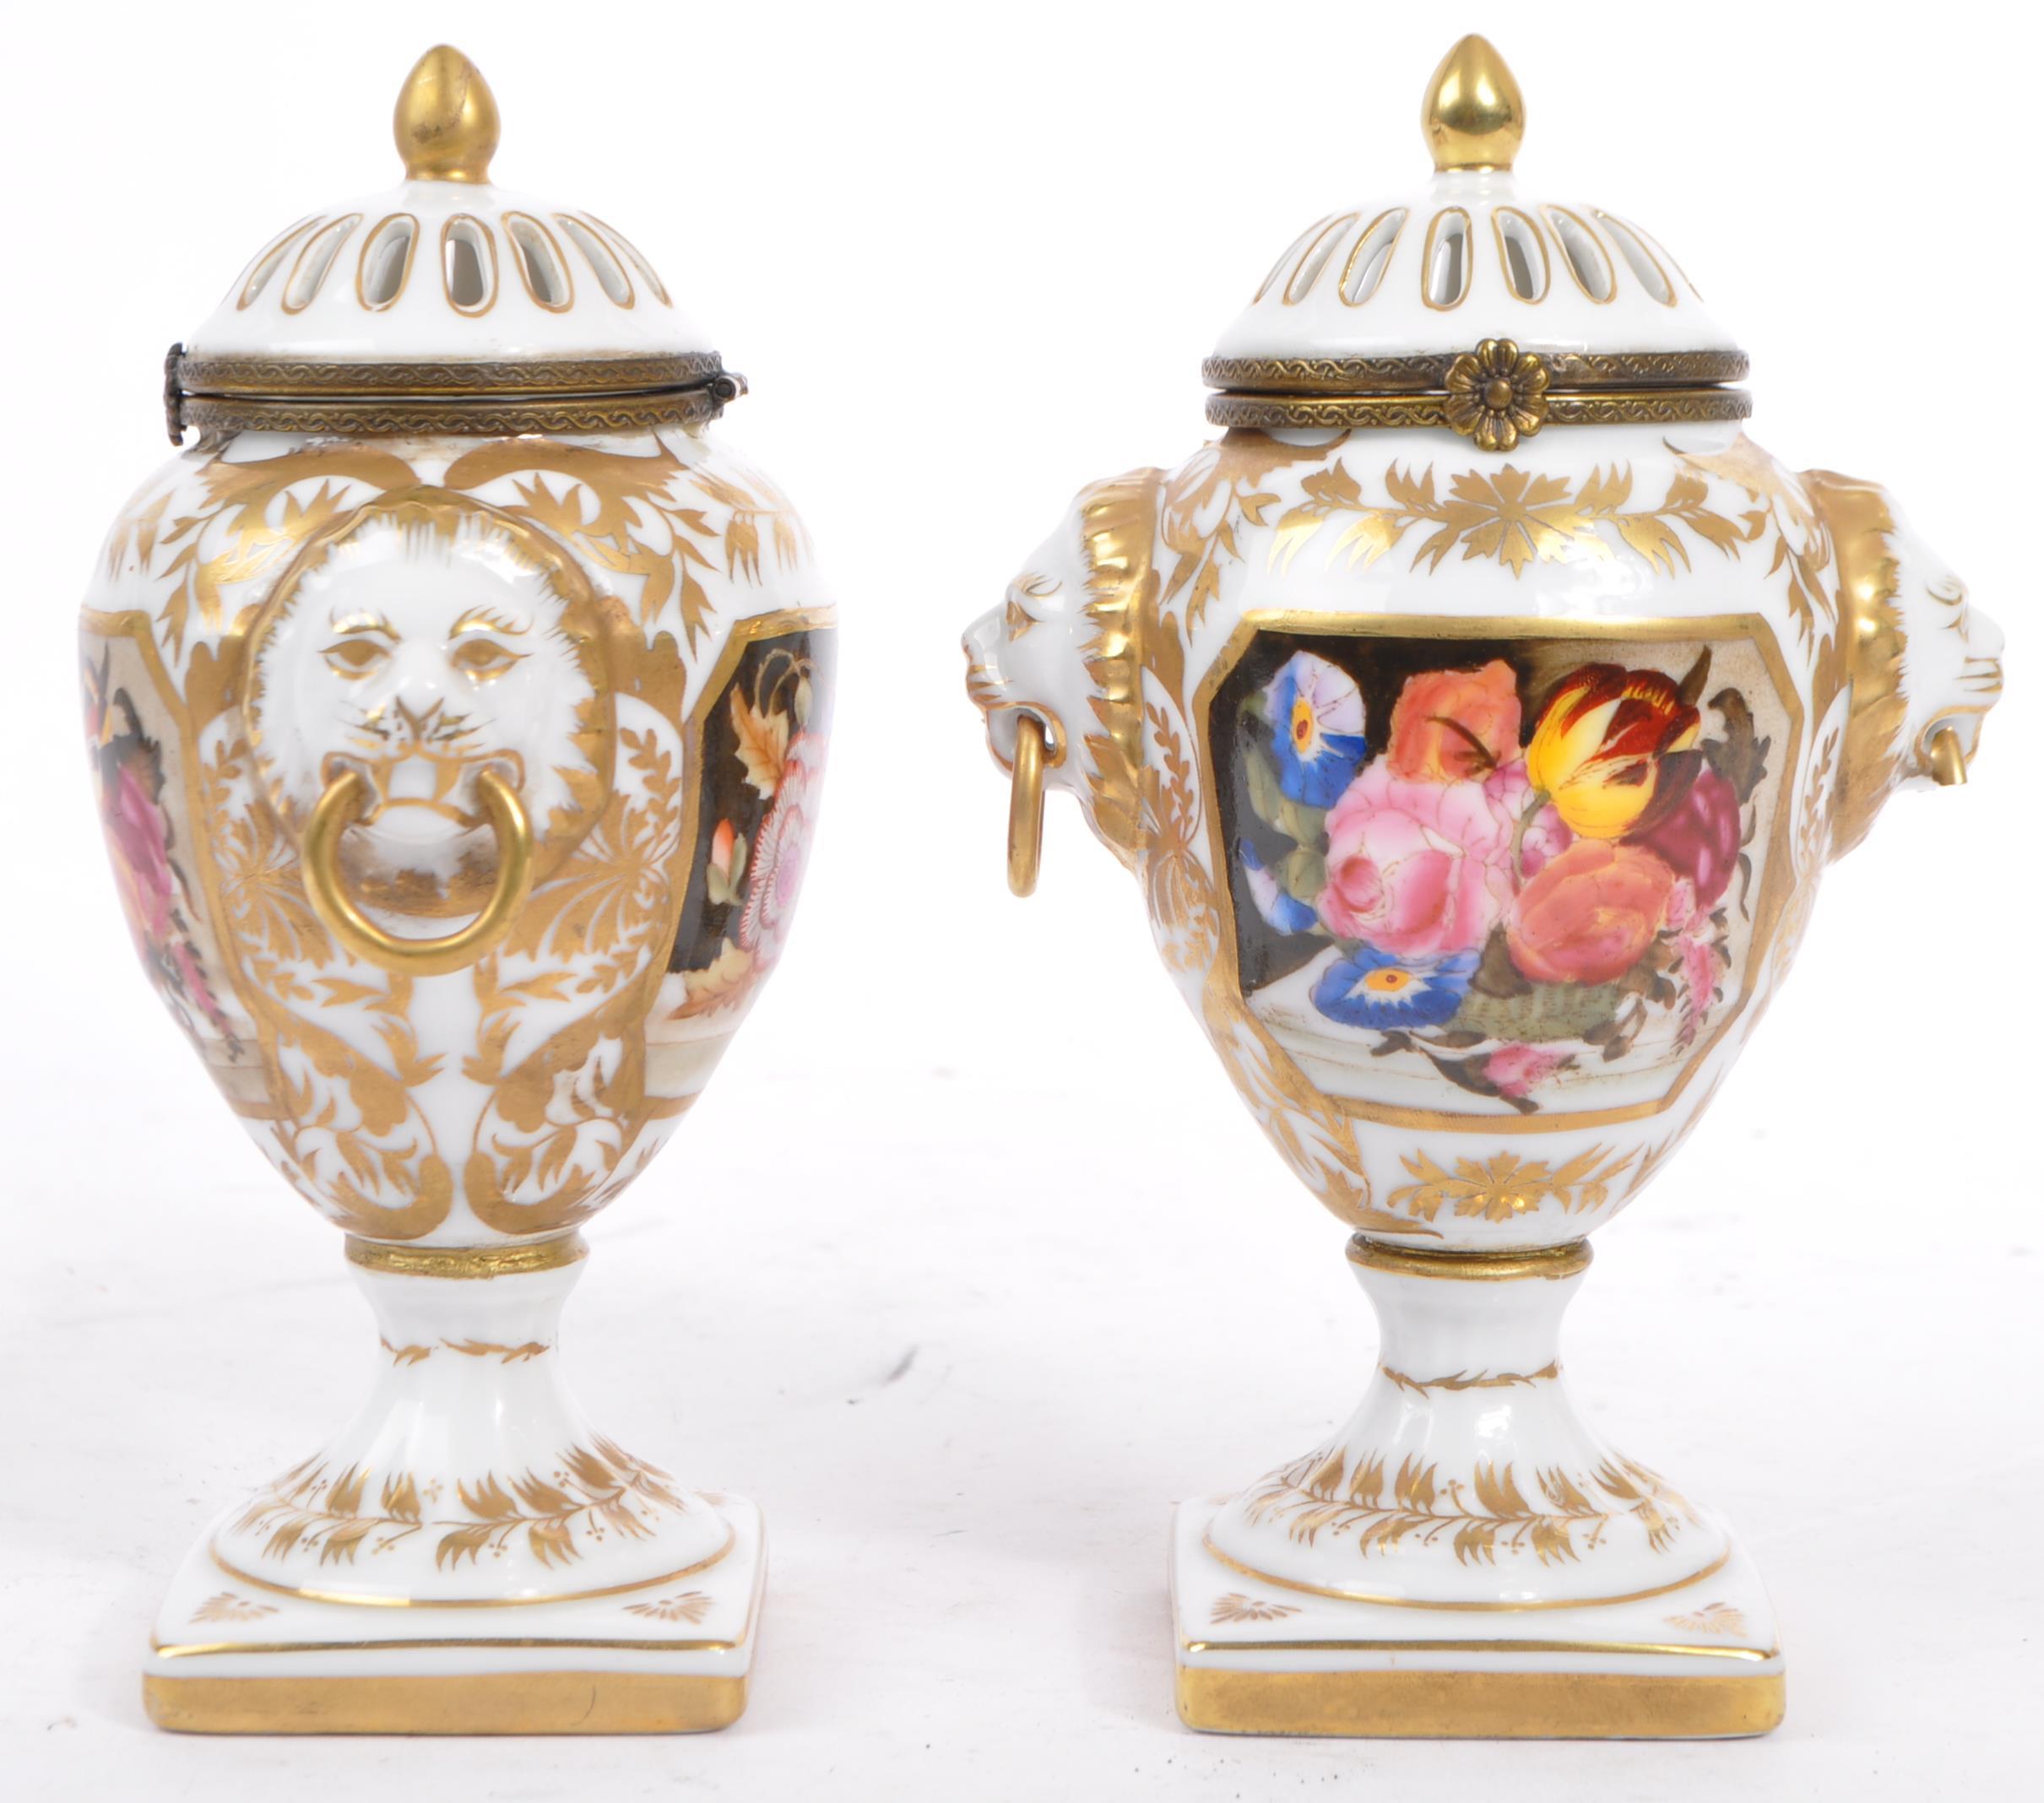 COLLECTION OF MINIATURE PORCELAIN VASES / URNS ETC. - Image 3 of 6